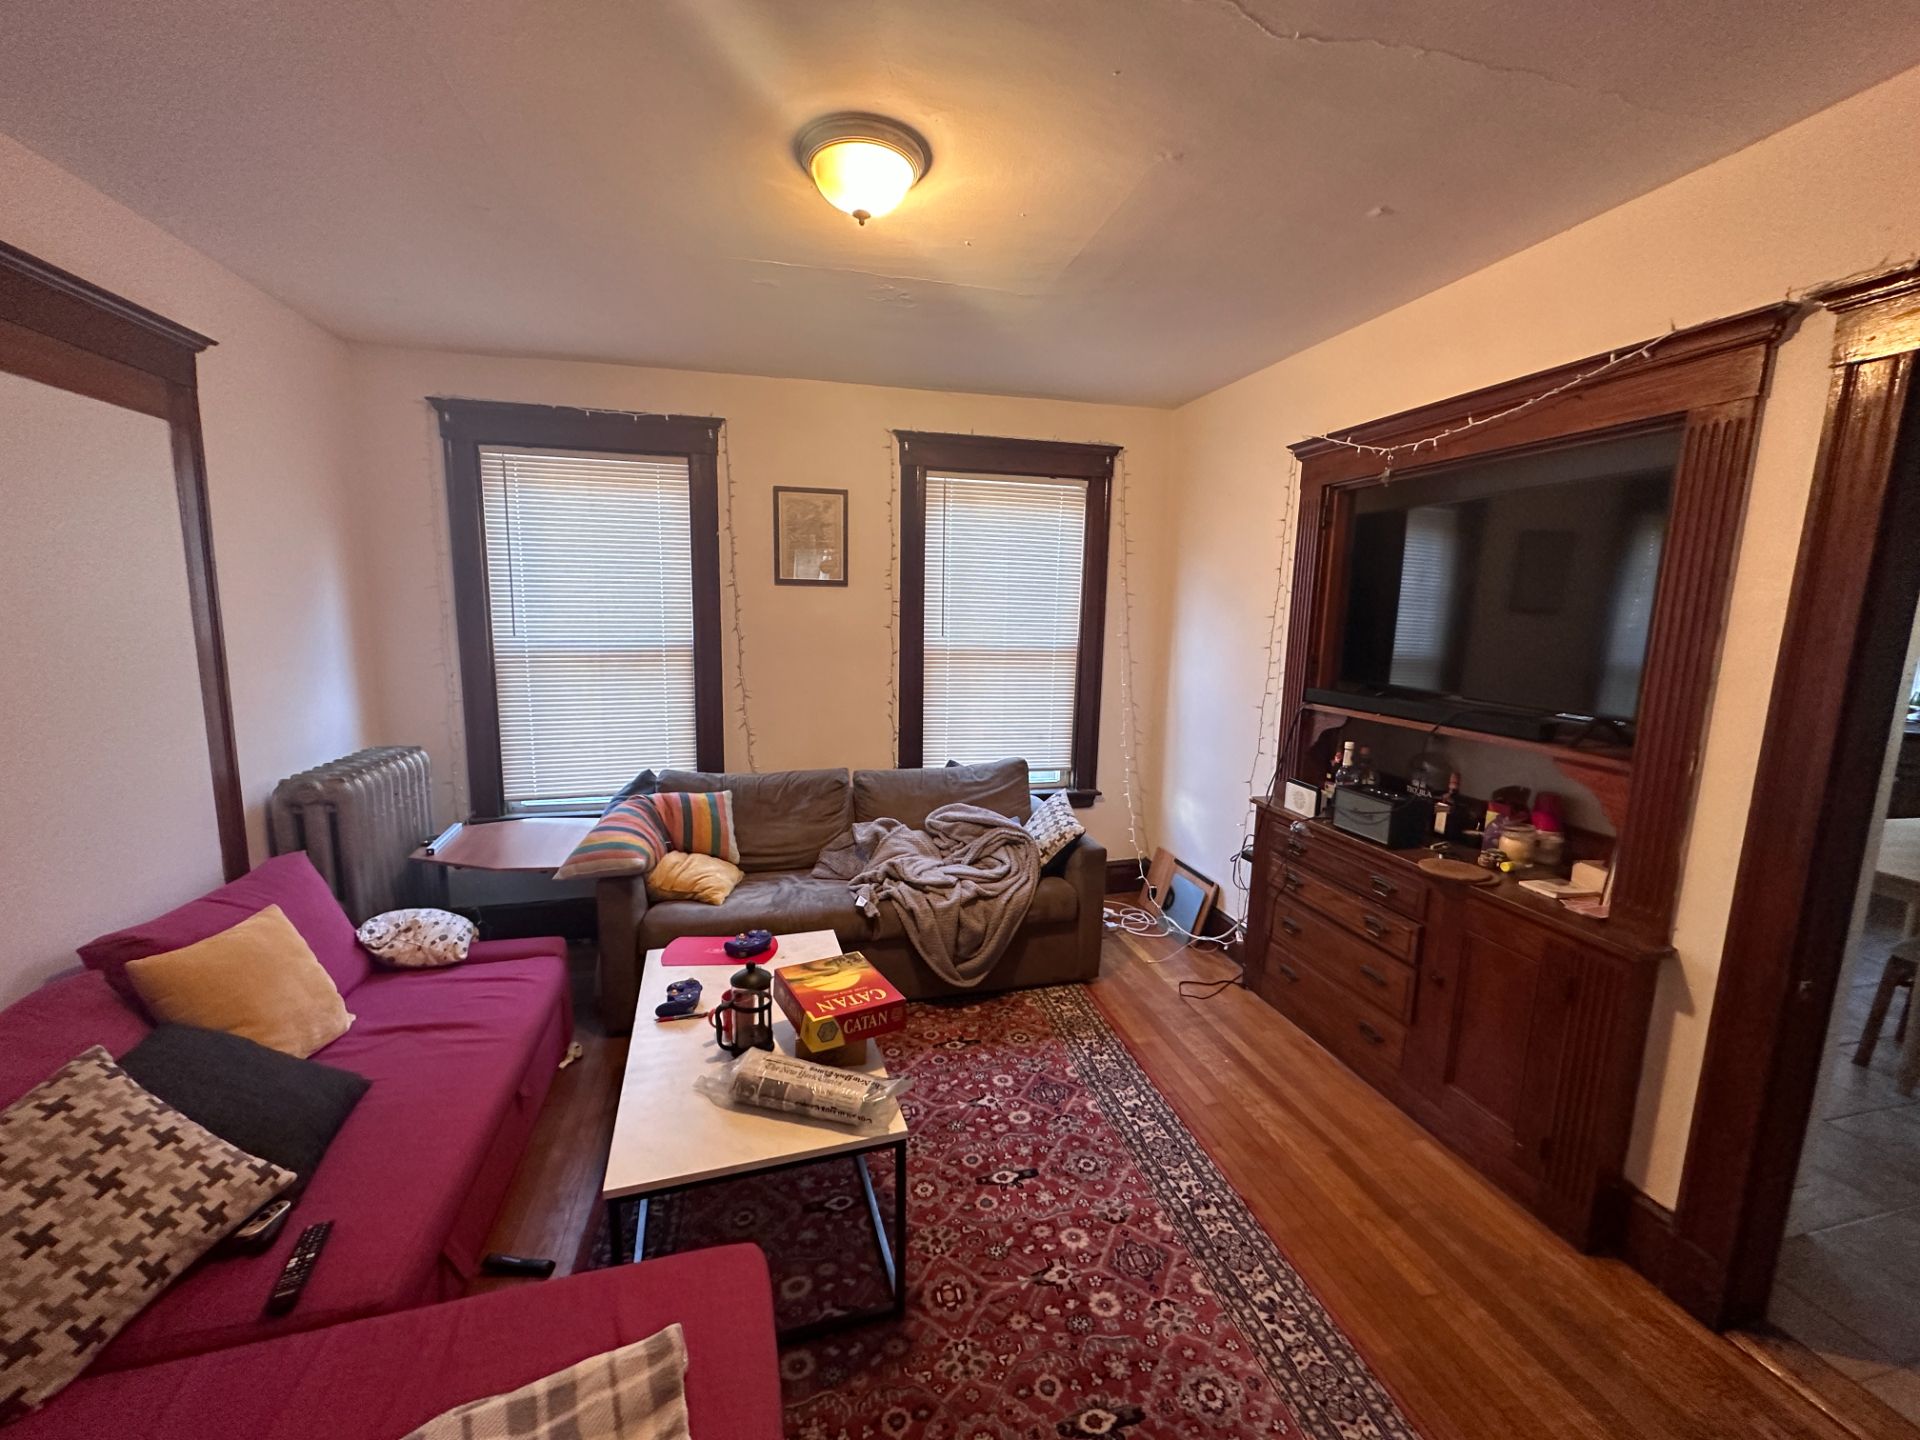 Photos of apartment on Columbus Ave.,Somerville MA 02143